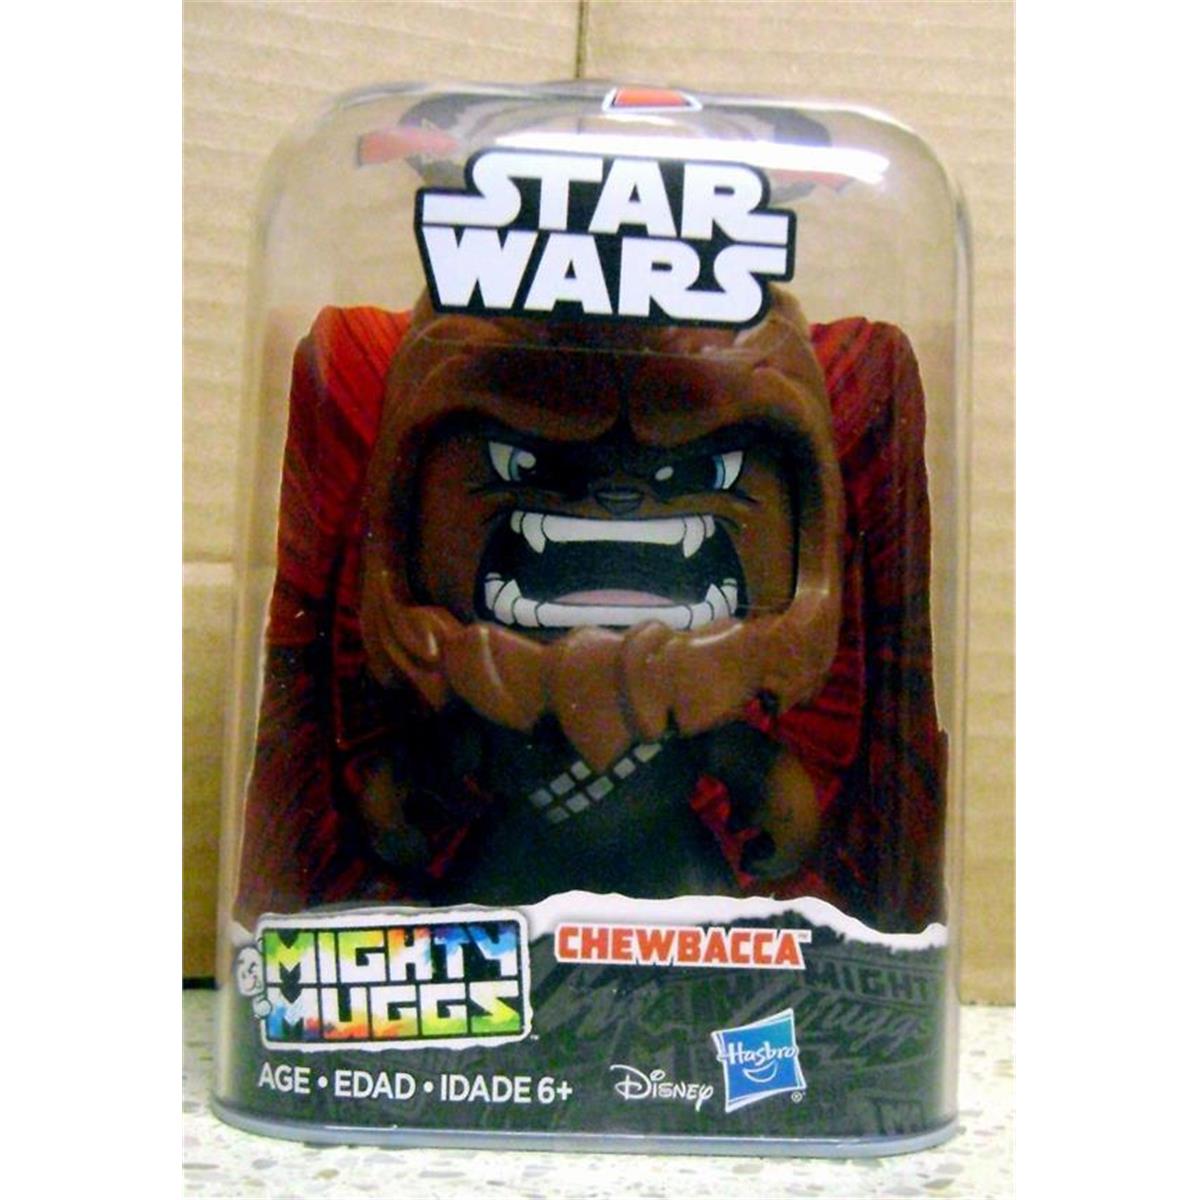 Picture of Autograph Warehouse 637318 3 x 4 in. Chewbacca Star Wars Toy - Mighty Muggs 02 Hasbro Disney NIB